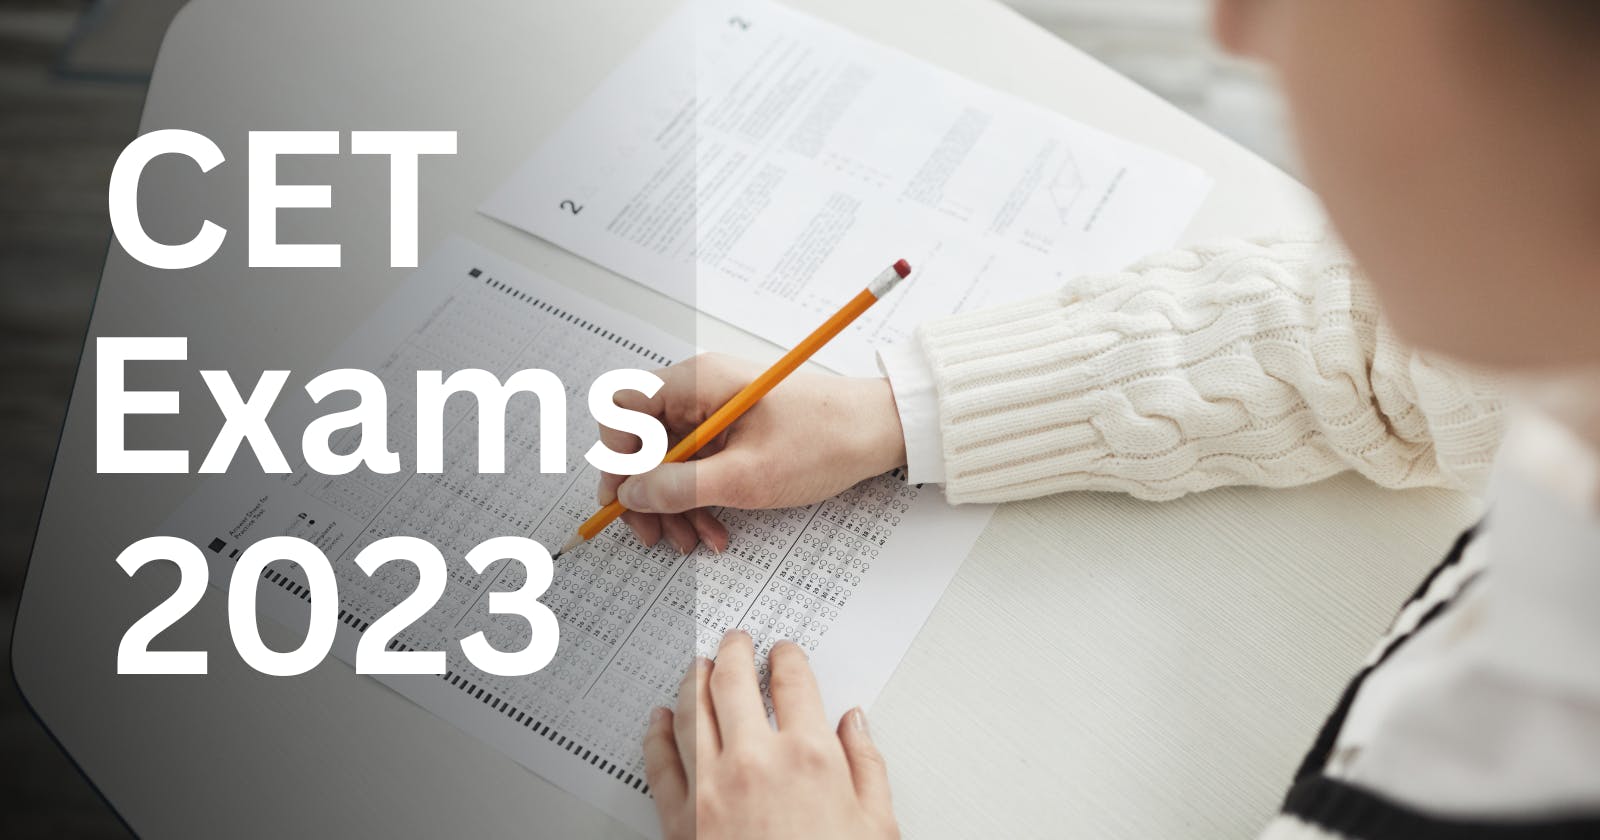 Everything Know about CET Exams, MHT CET Admission